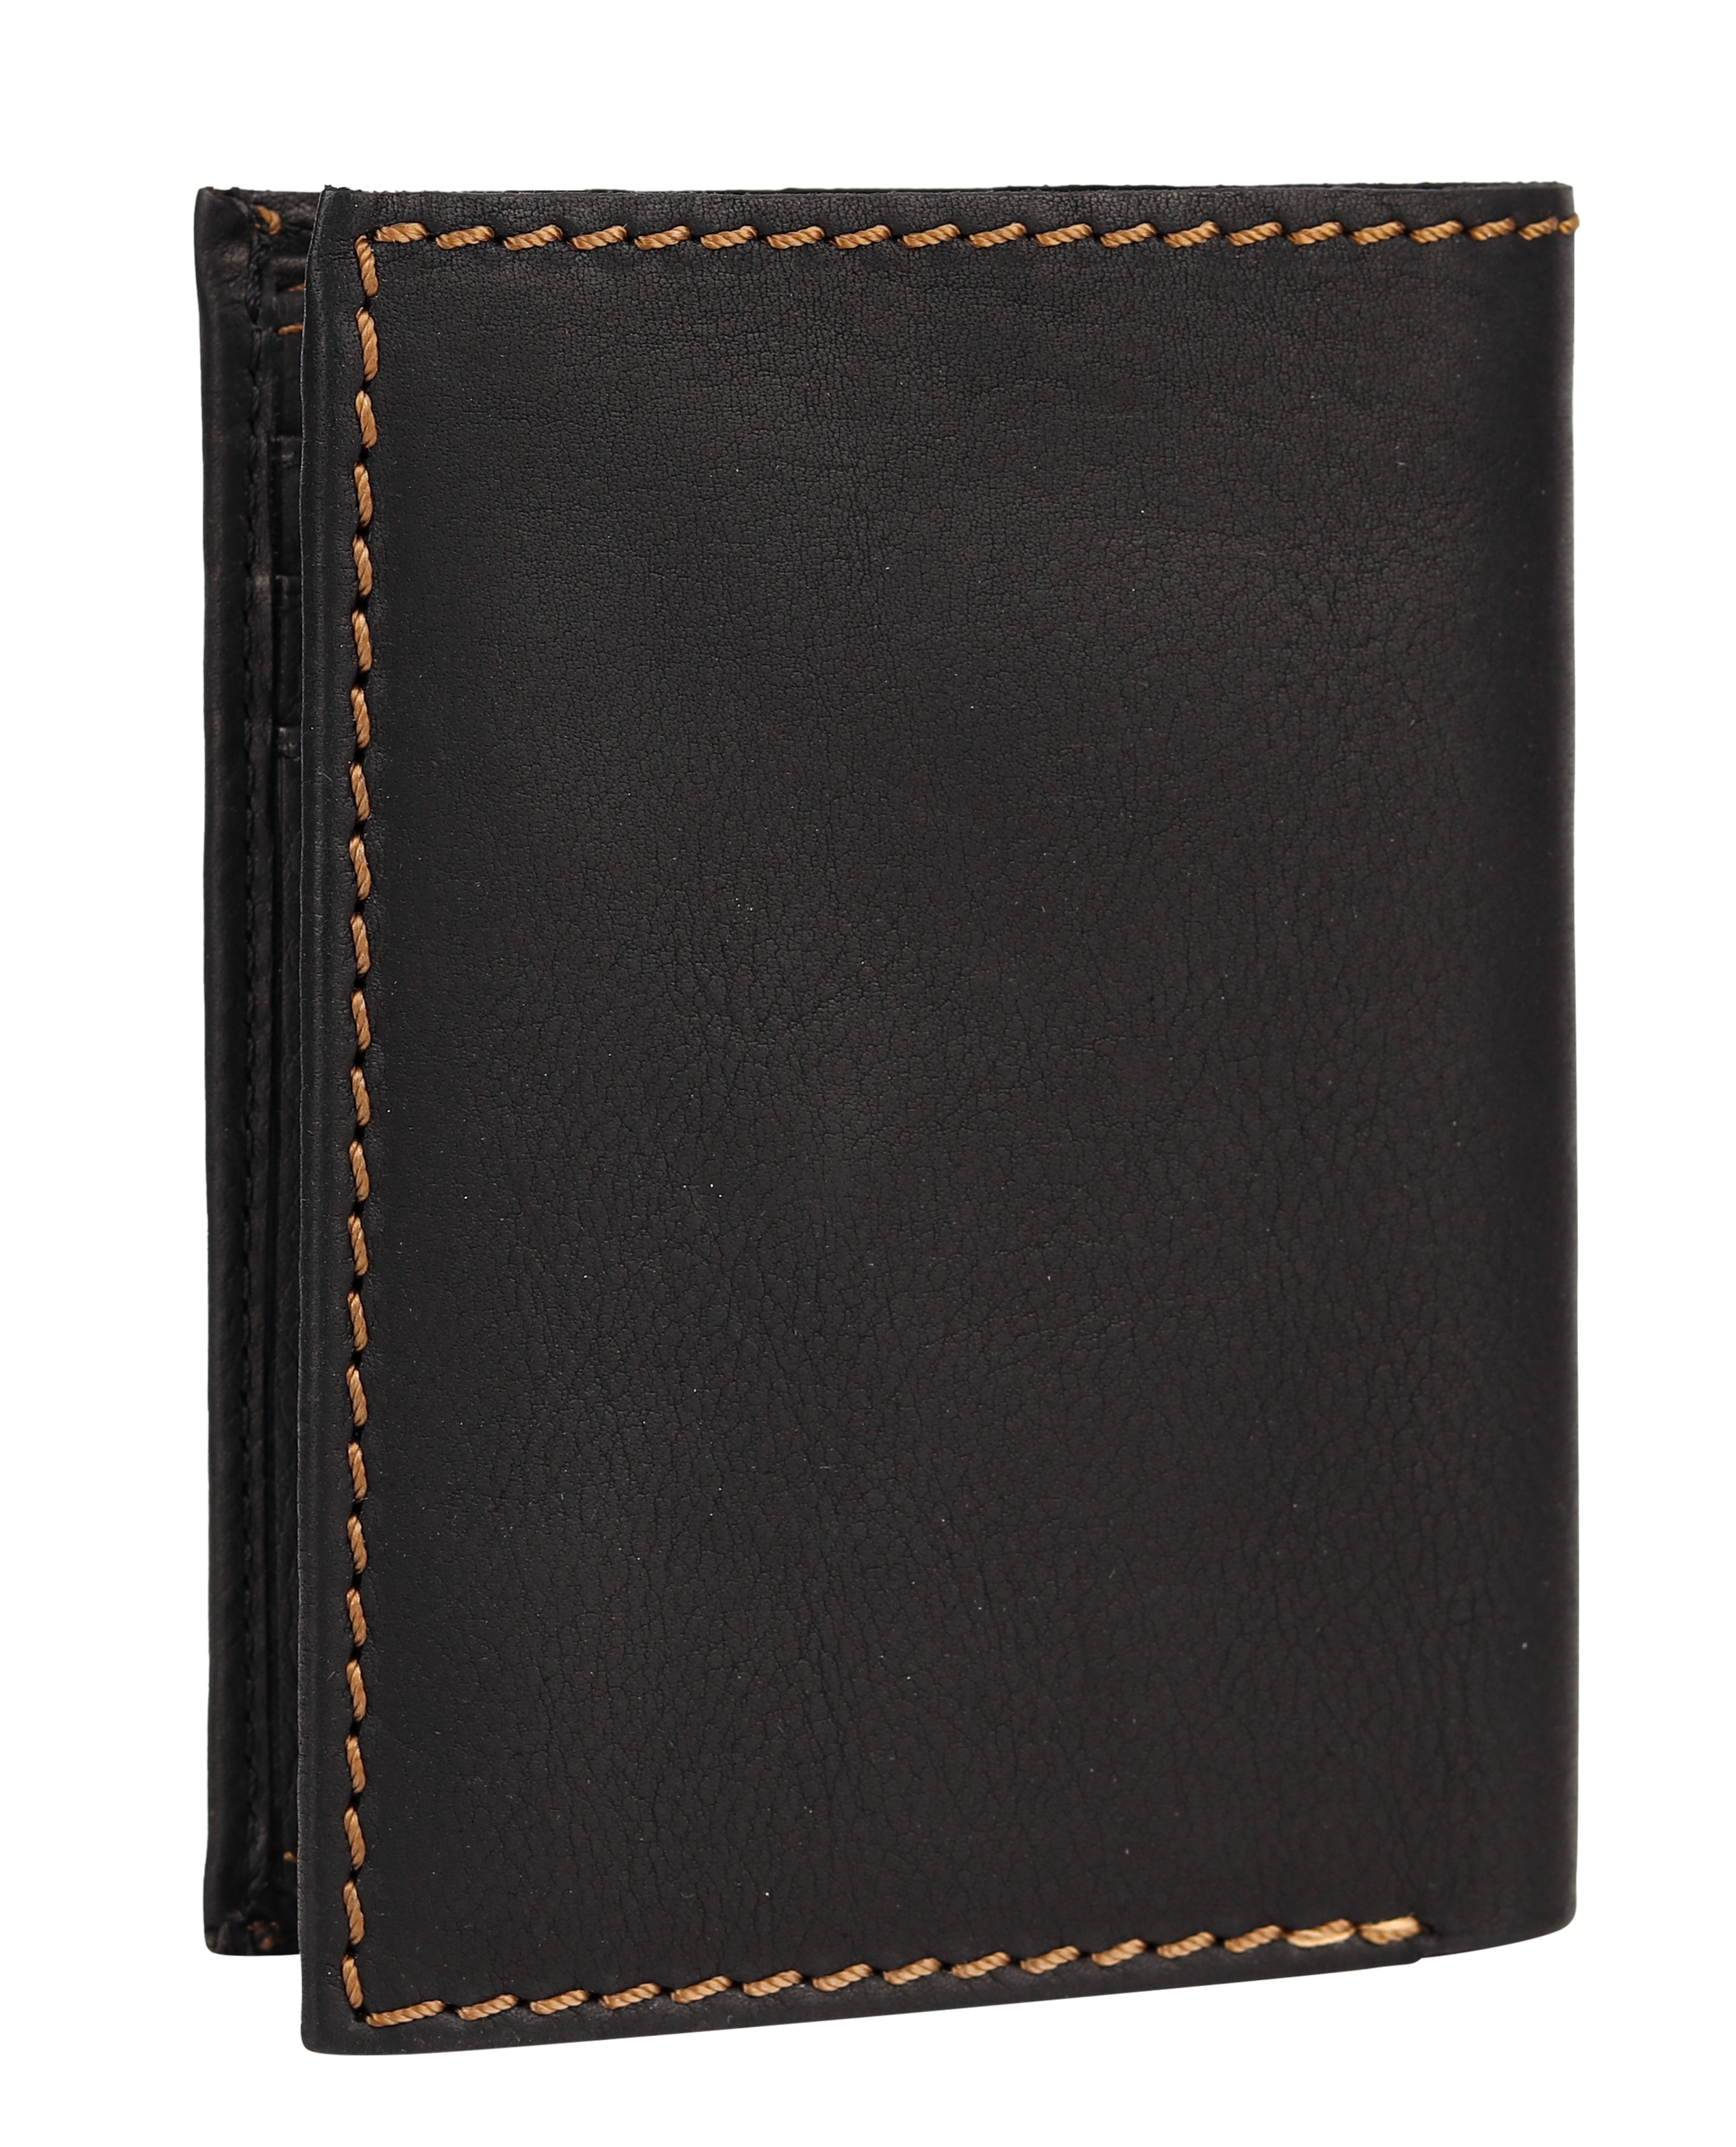 BOL Upright Coin Leather Wallet